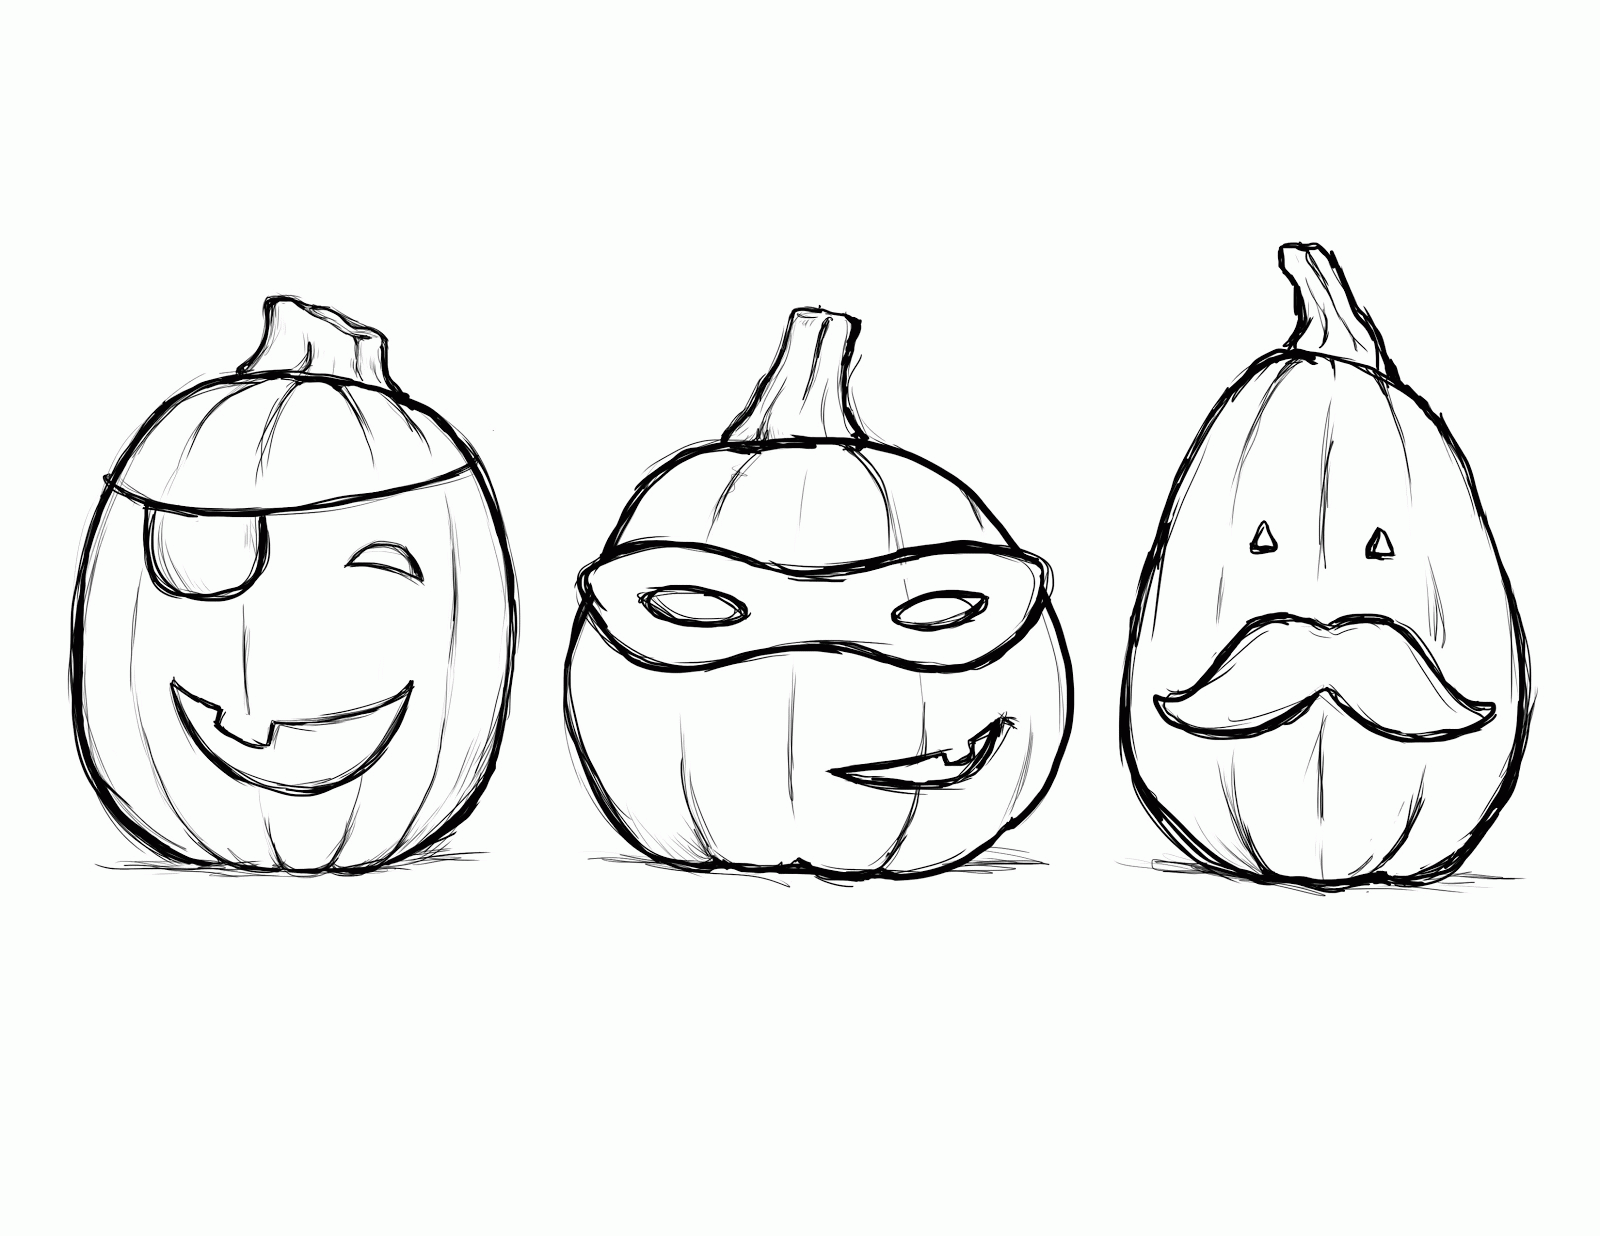 Cartoon Pumpkins Coloring Pages - Coloring Pages For All Ages